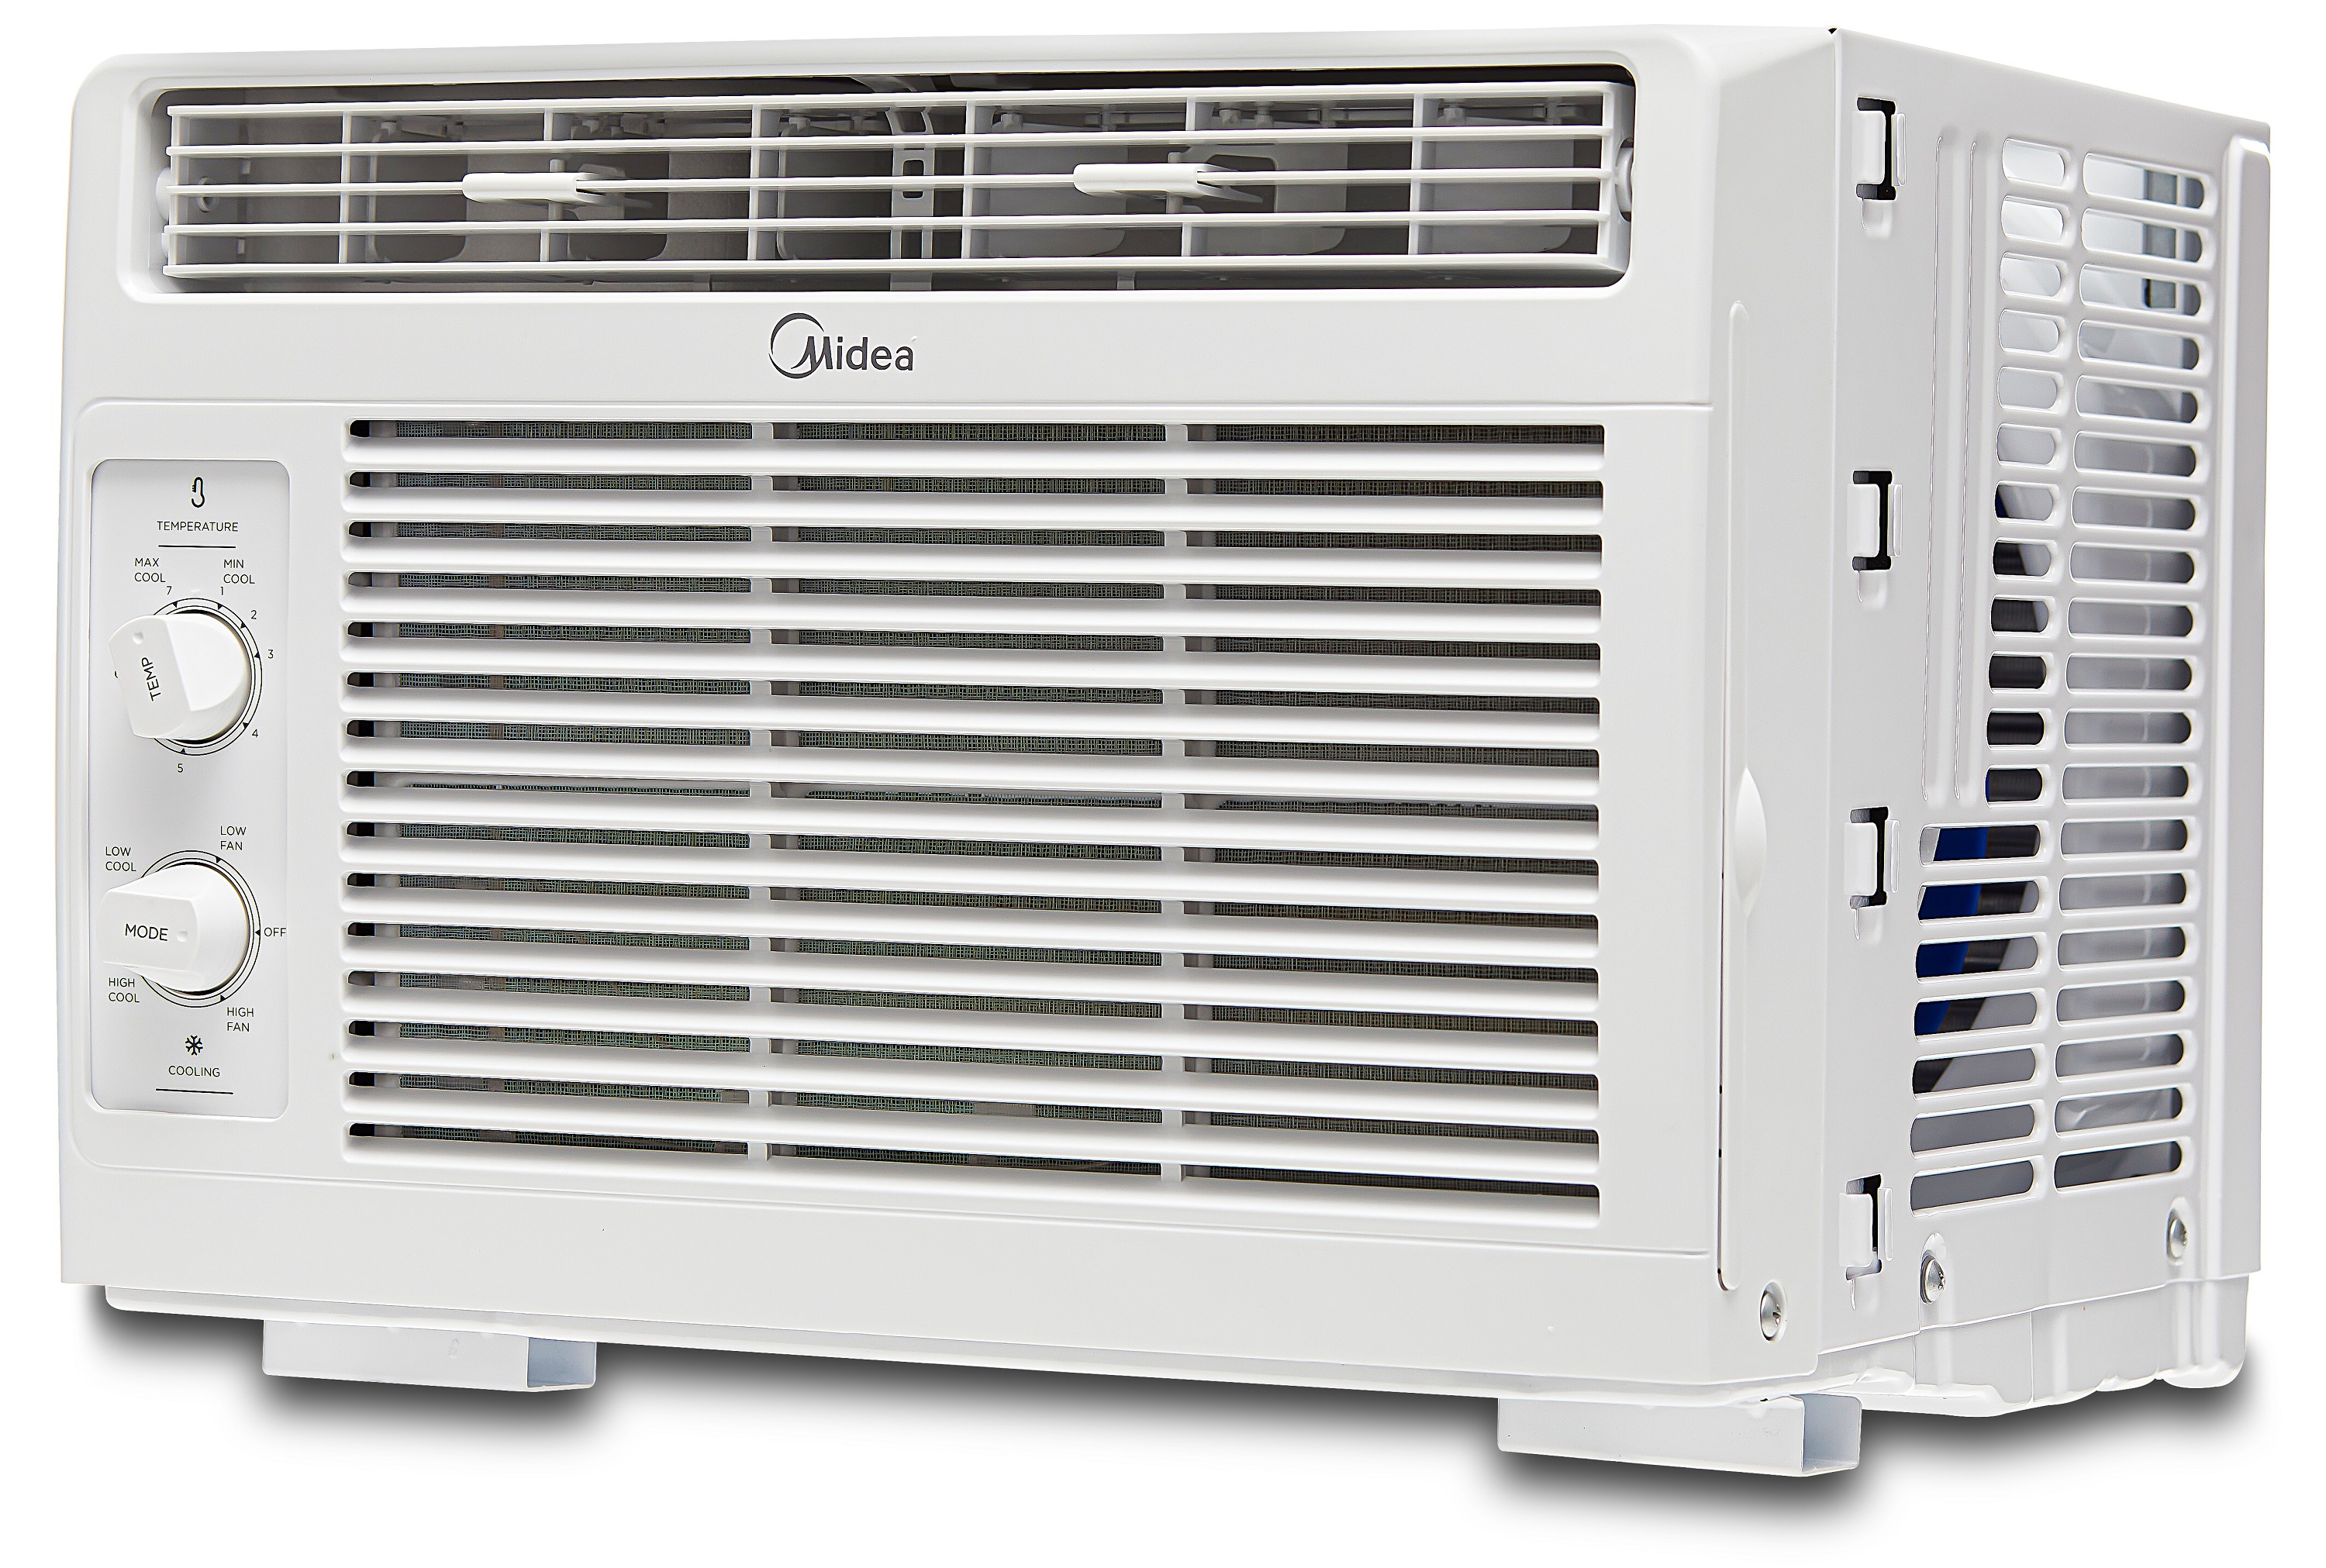 Midea 5,000 BTU 150 Sq Ft Mechanical Window Air Conditioner, White, MAW05M1WWT - image 10 of 17